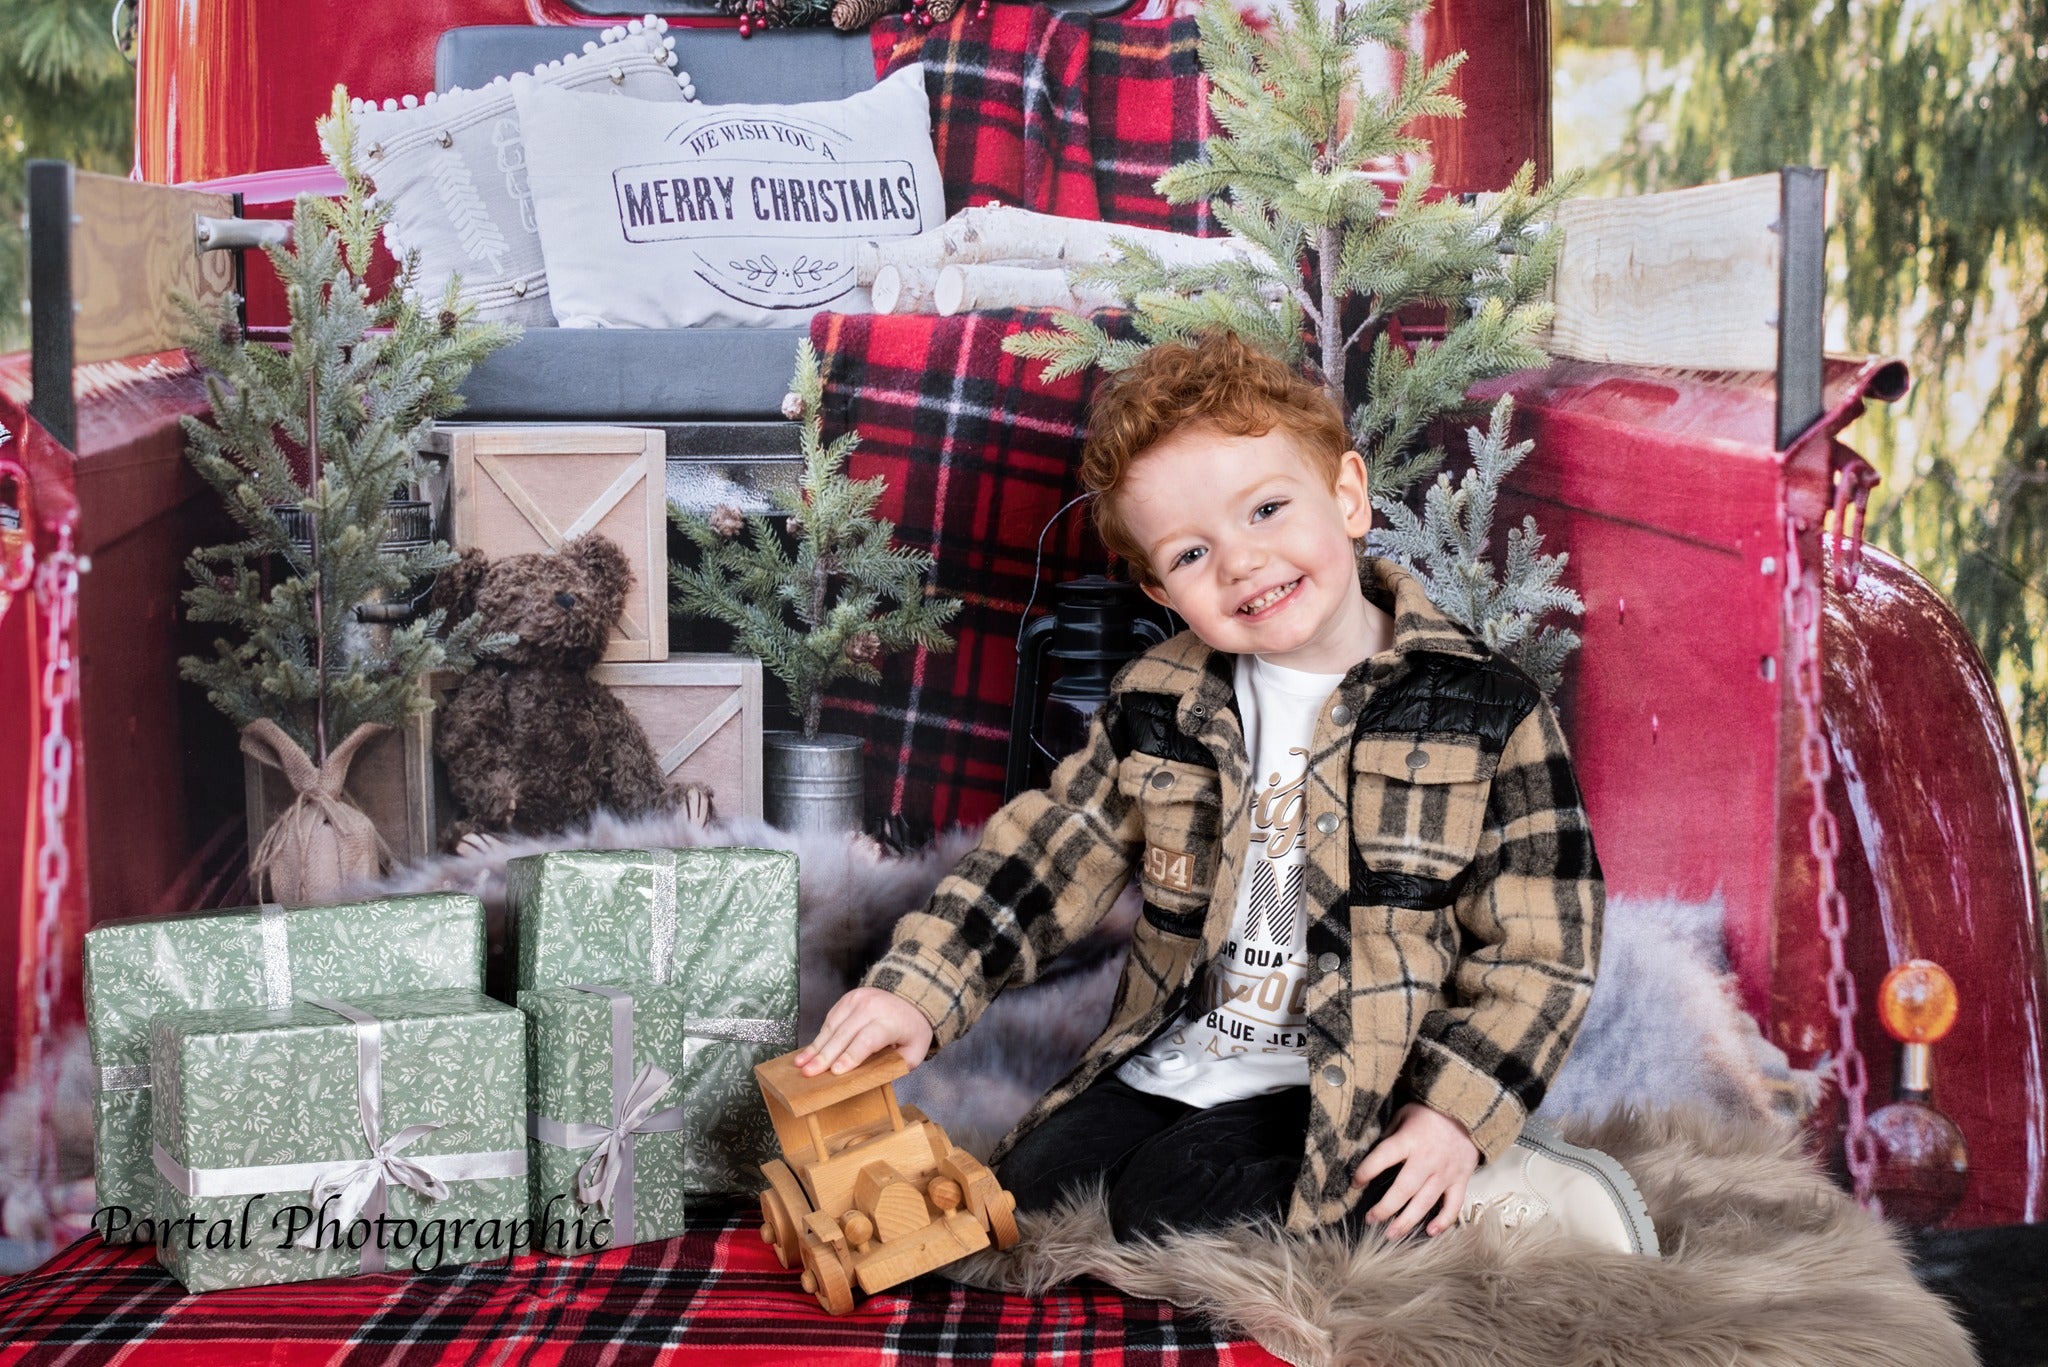 Kate Red Christmas Truck Backdrop Designed by Mandy Ringe Photography